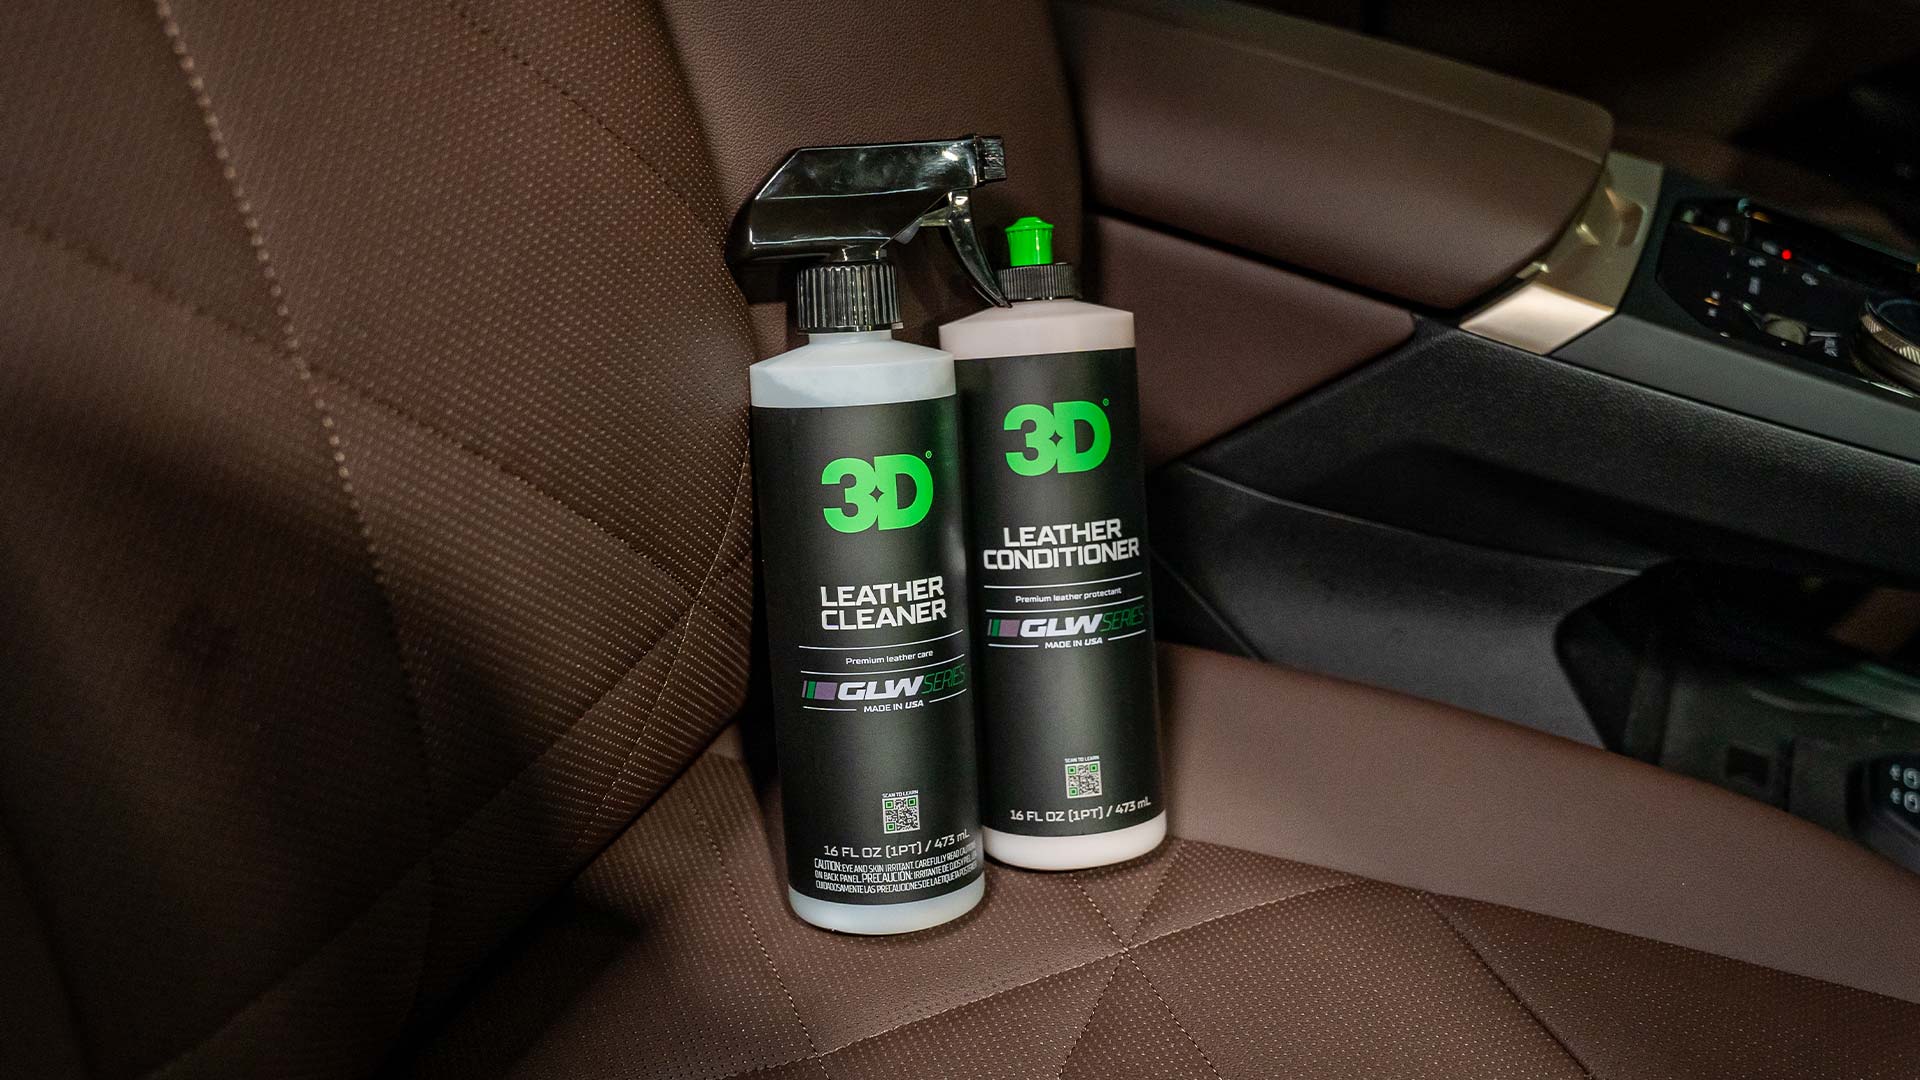 3d glw leather cleaner and conditioner on brown leather bmw seats